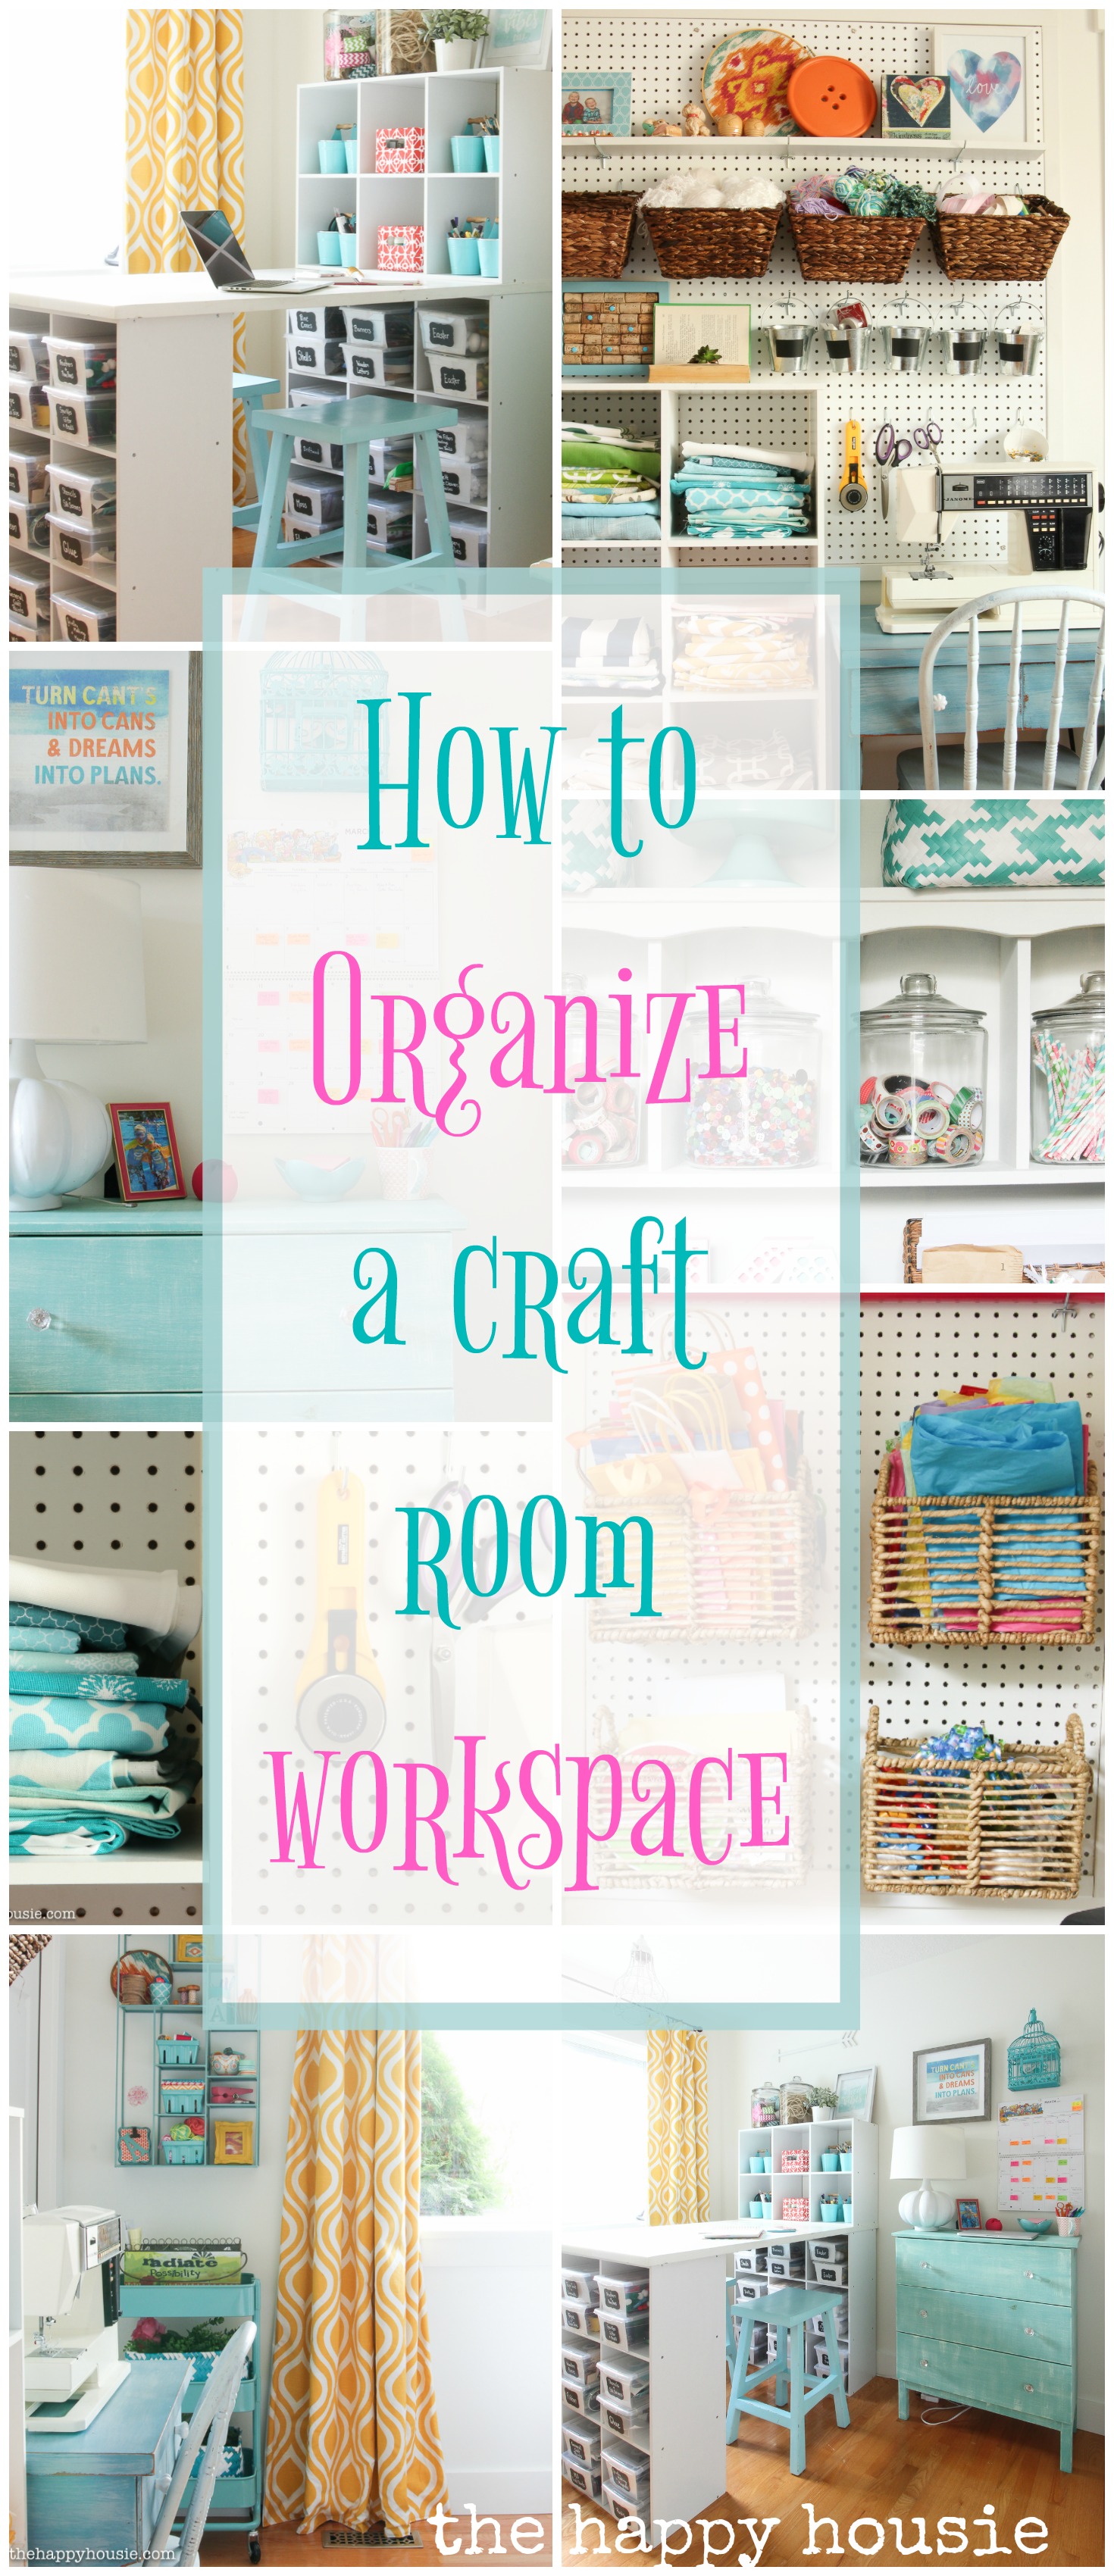 How To Organize a Craft Room Workspace graphic.